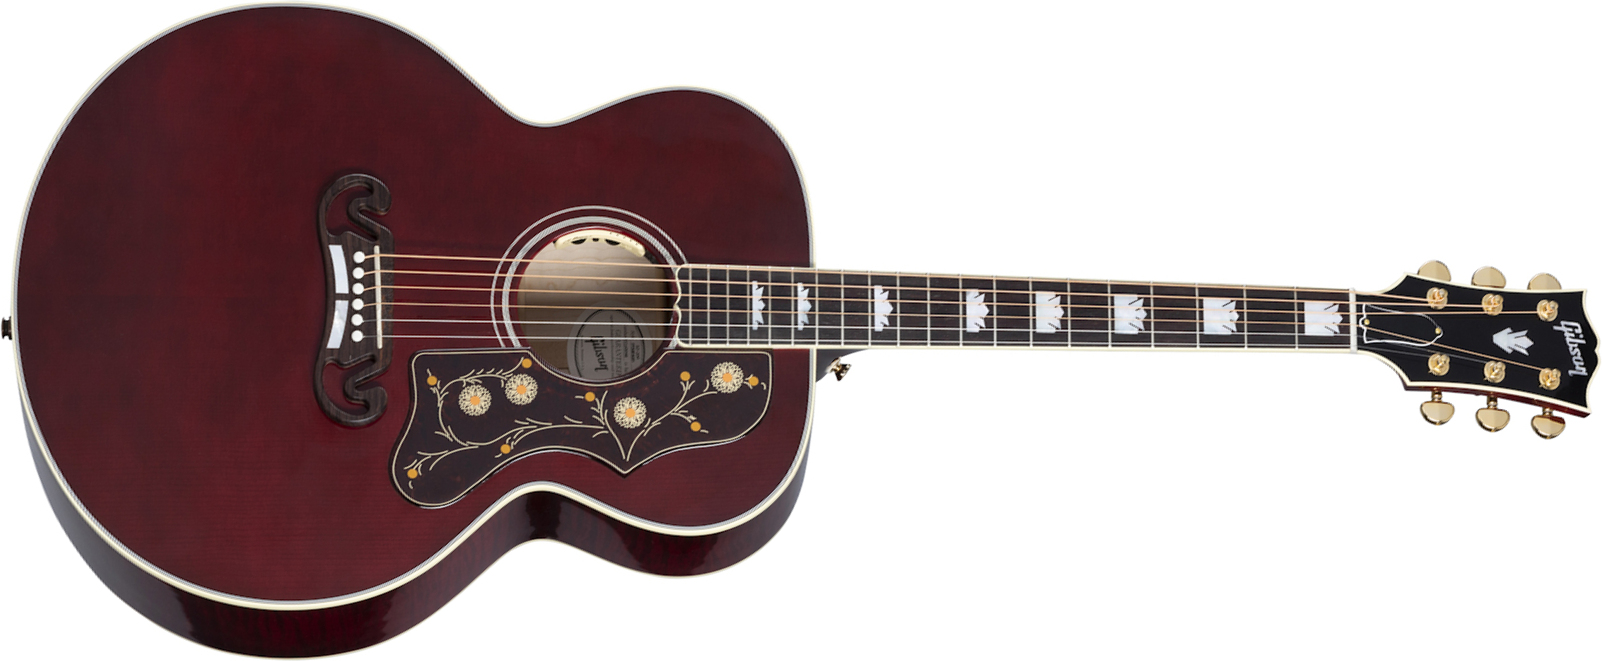 Gibson Sj-200 Standard Modern 2021 Super Jumbo Epicea Erable Rw - Wine Red - Electro acoustic guitar - Main picture